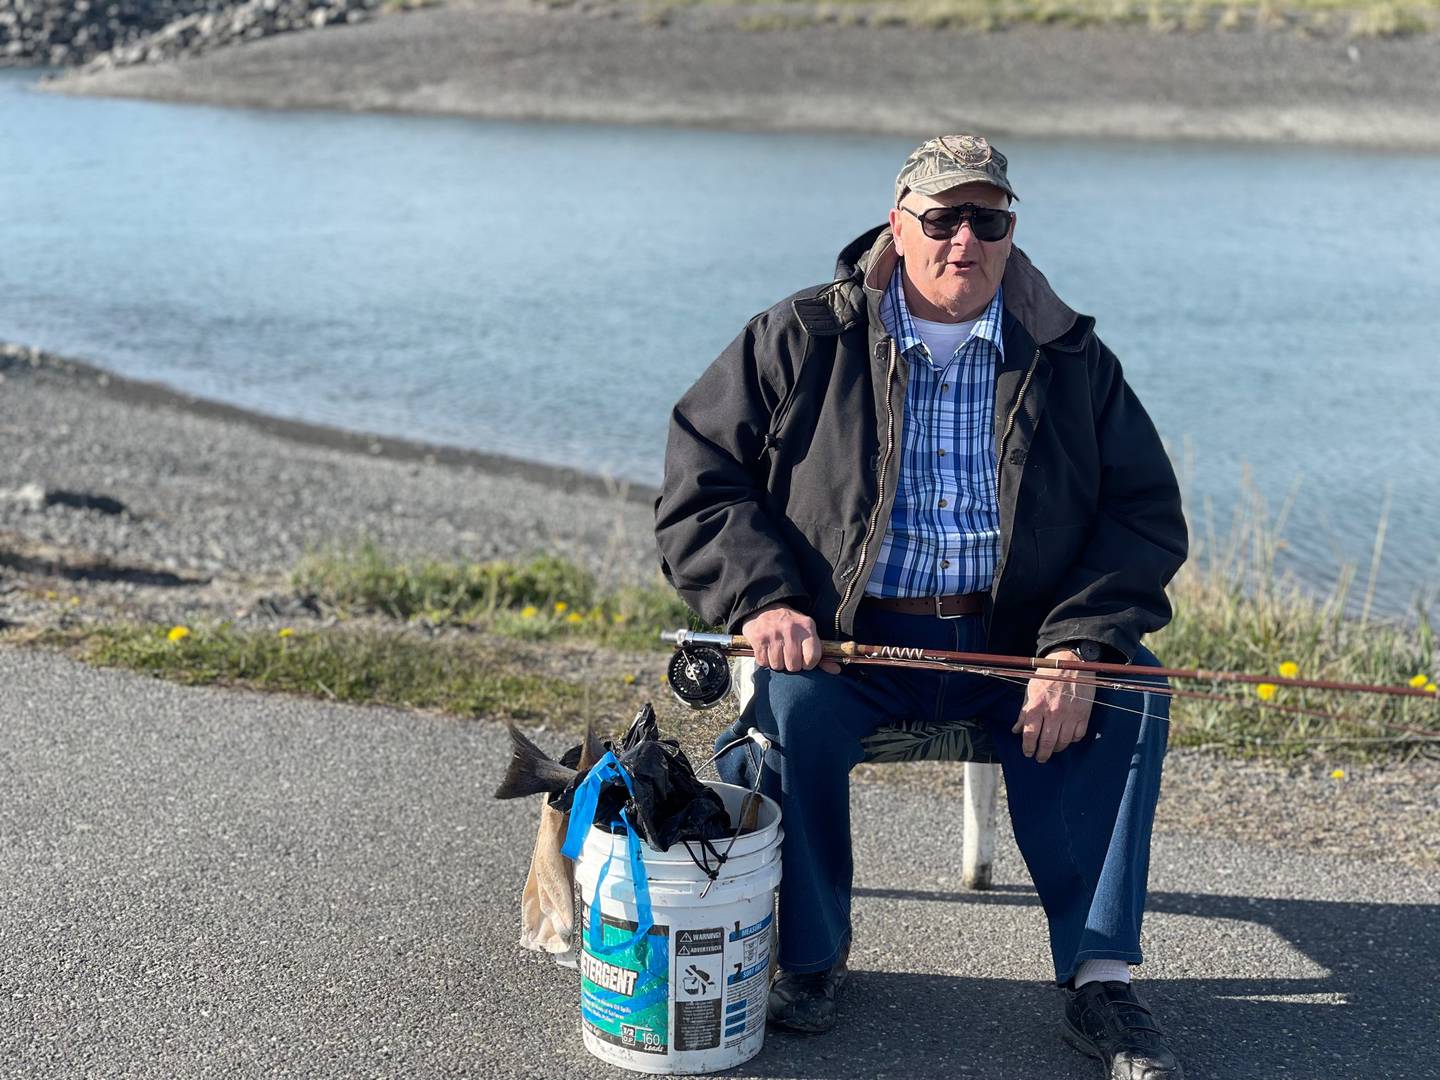 Tom Schroeder – also known as “The Mayor” of the Nick Dudiak Lagoon fishing hole – poses for a photo